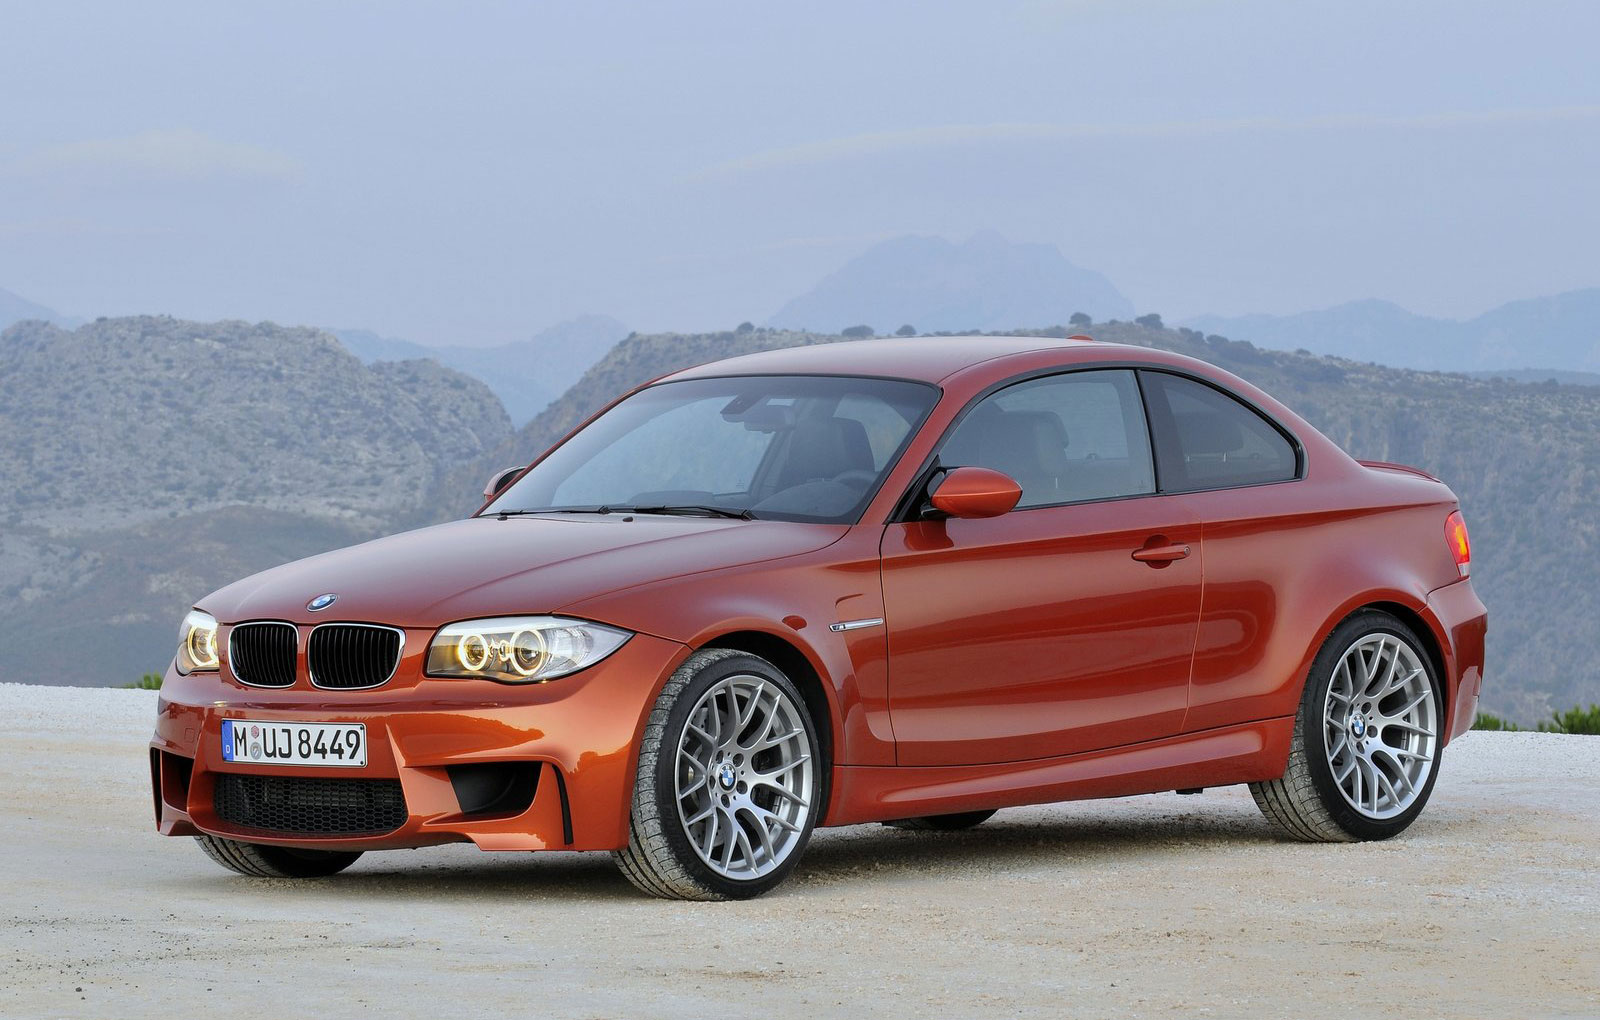 Bmw 1 Series M Coupe Wallpapers Vehicles Hq Bmw 1 Series M Coupe Pictures 4k Wallpapers 19